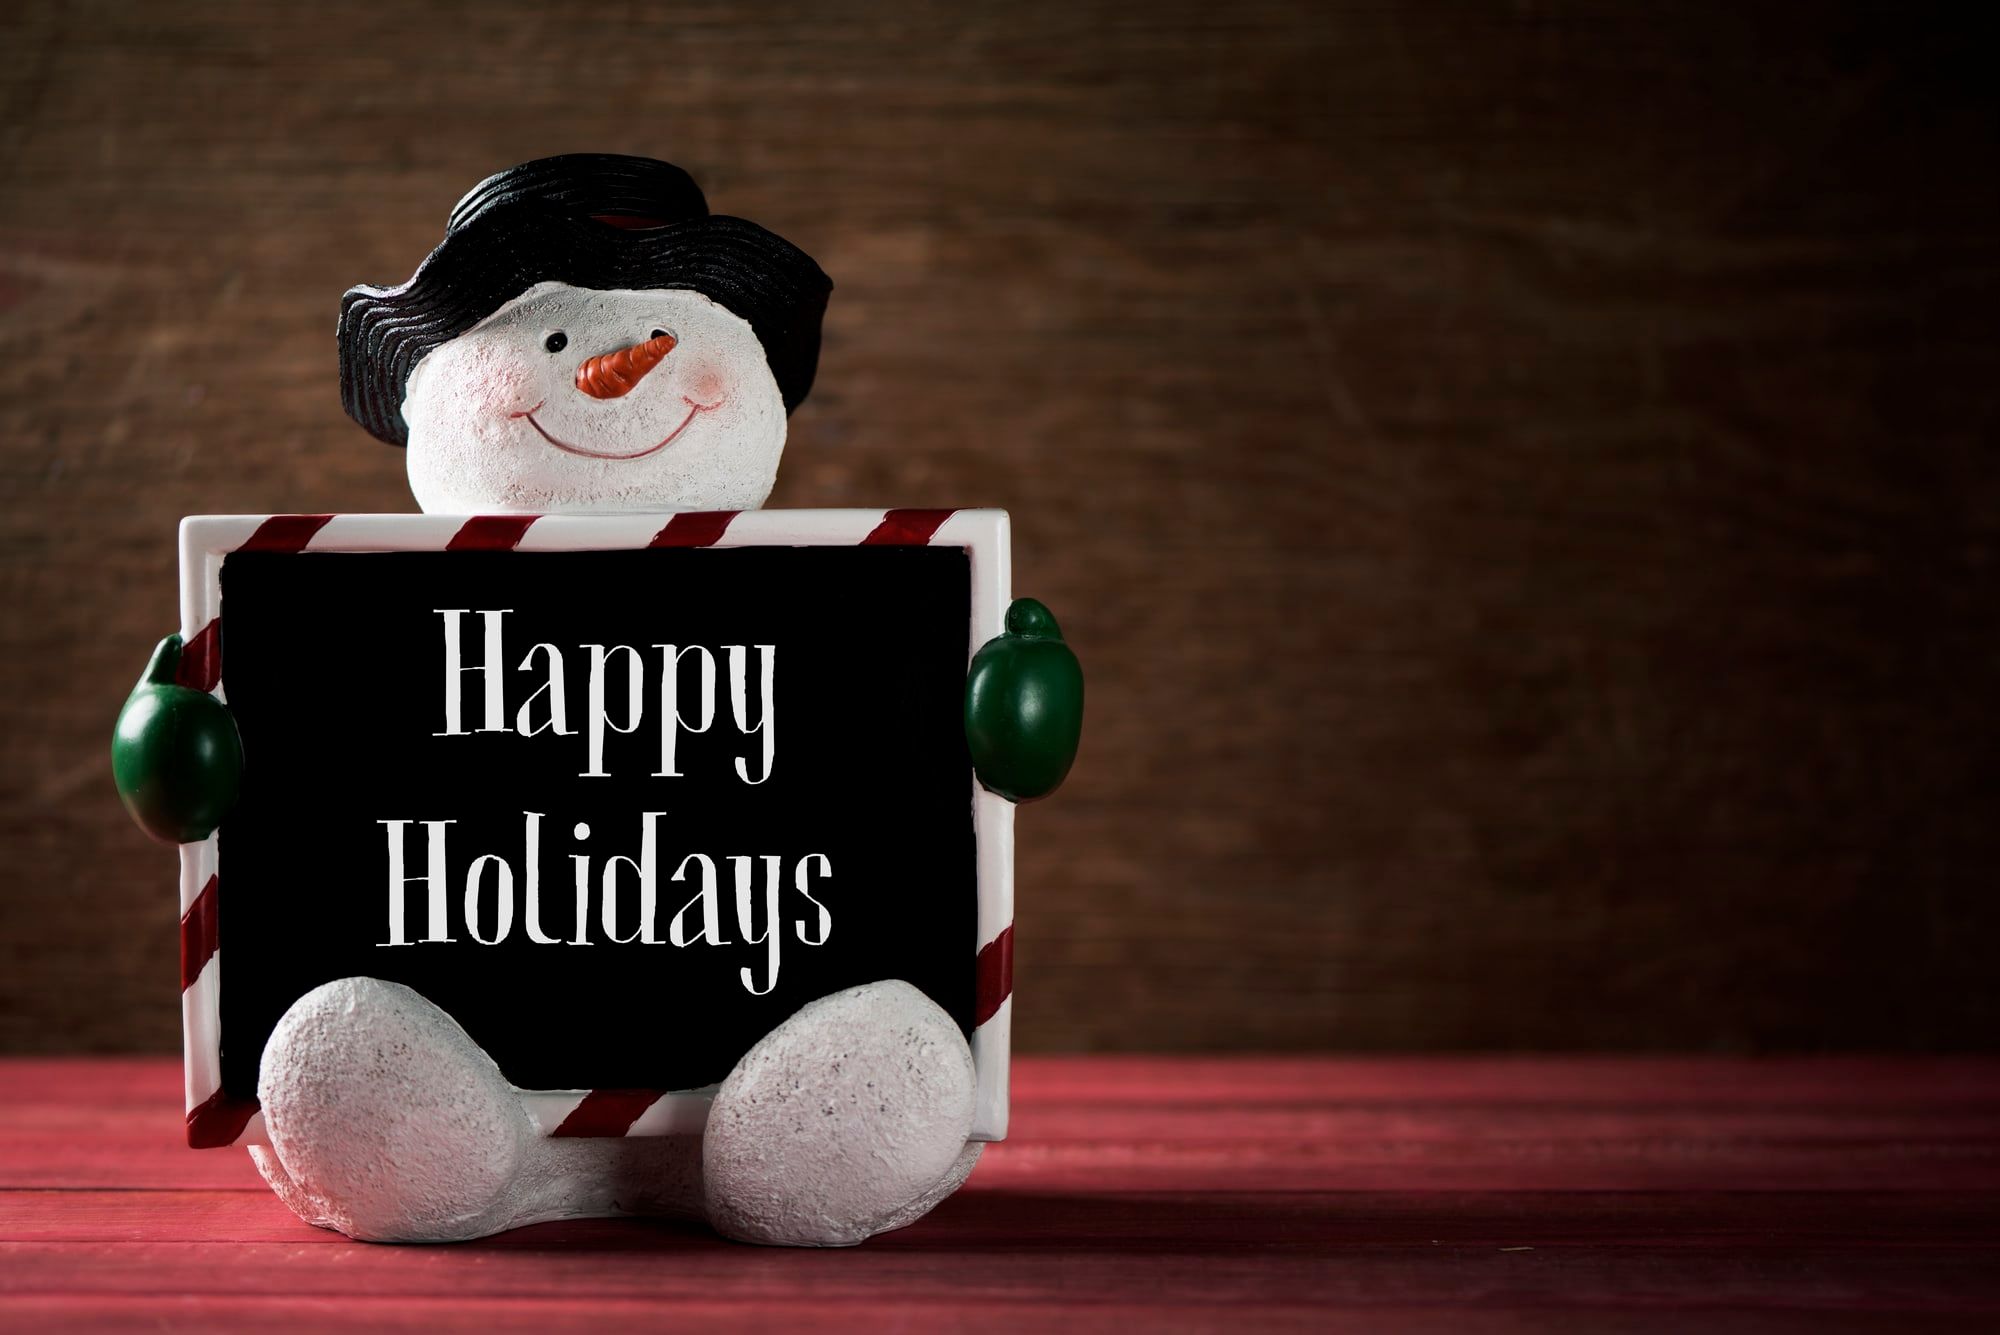 a funny snowman holding a black signboard with the text happy holidays written in it against a rustic wooden surface with a negative space on the right